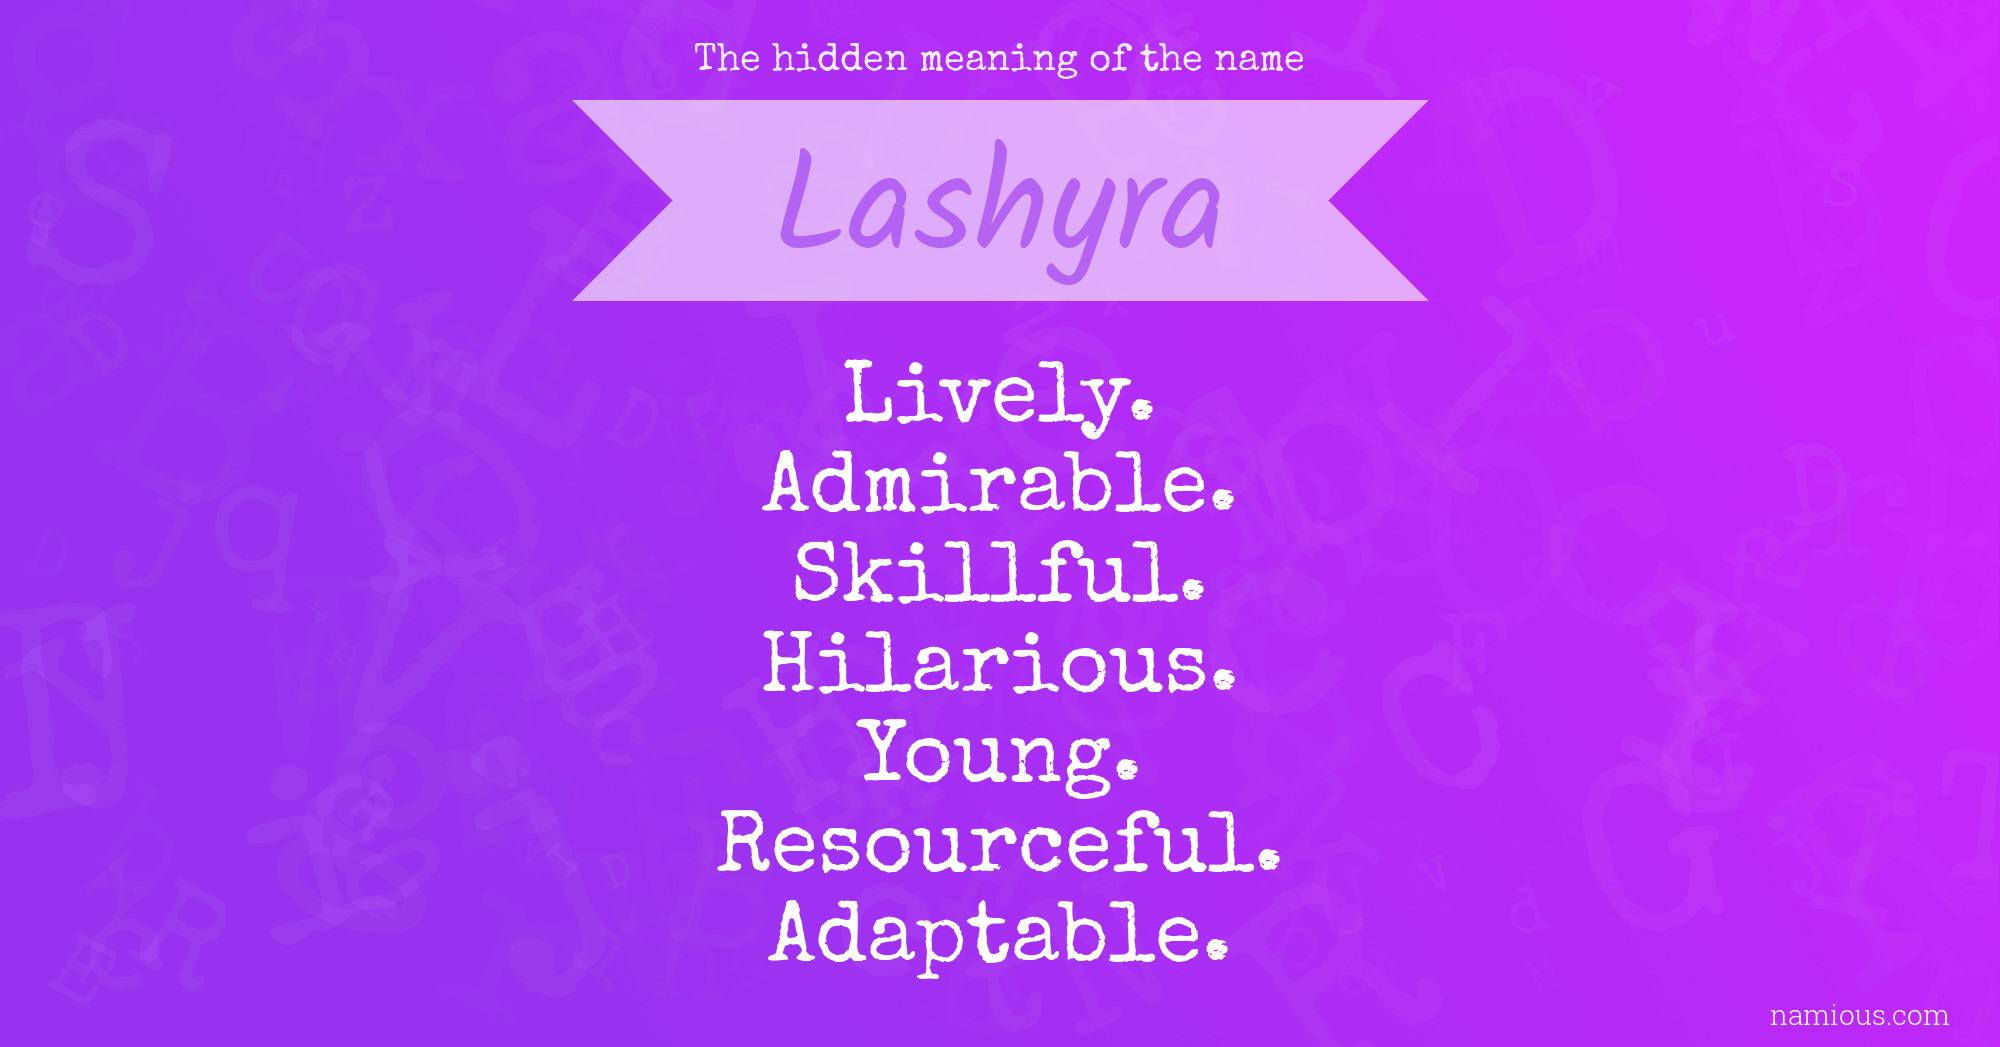 The hidden meaning of the name Lashyra